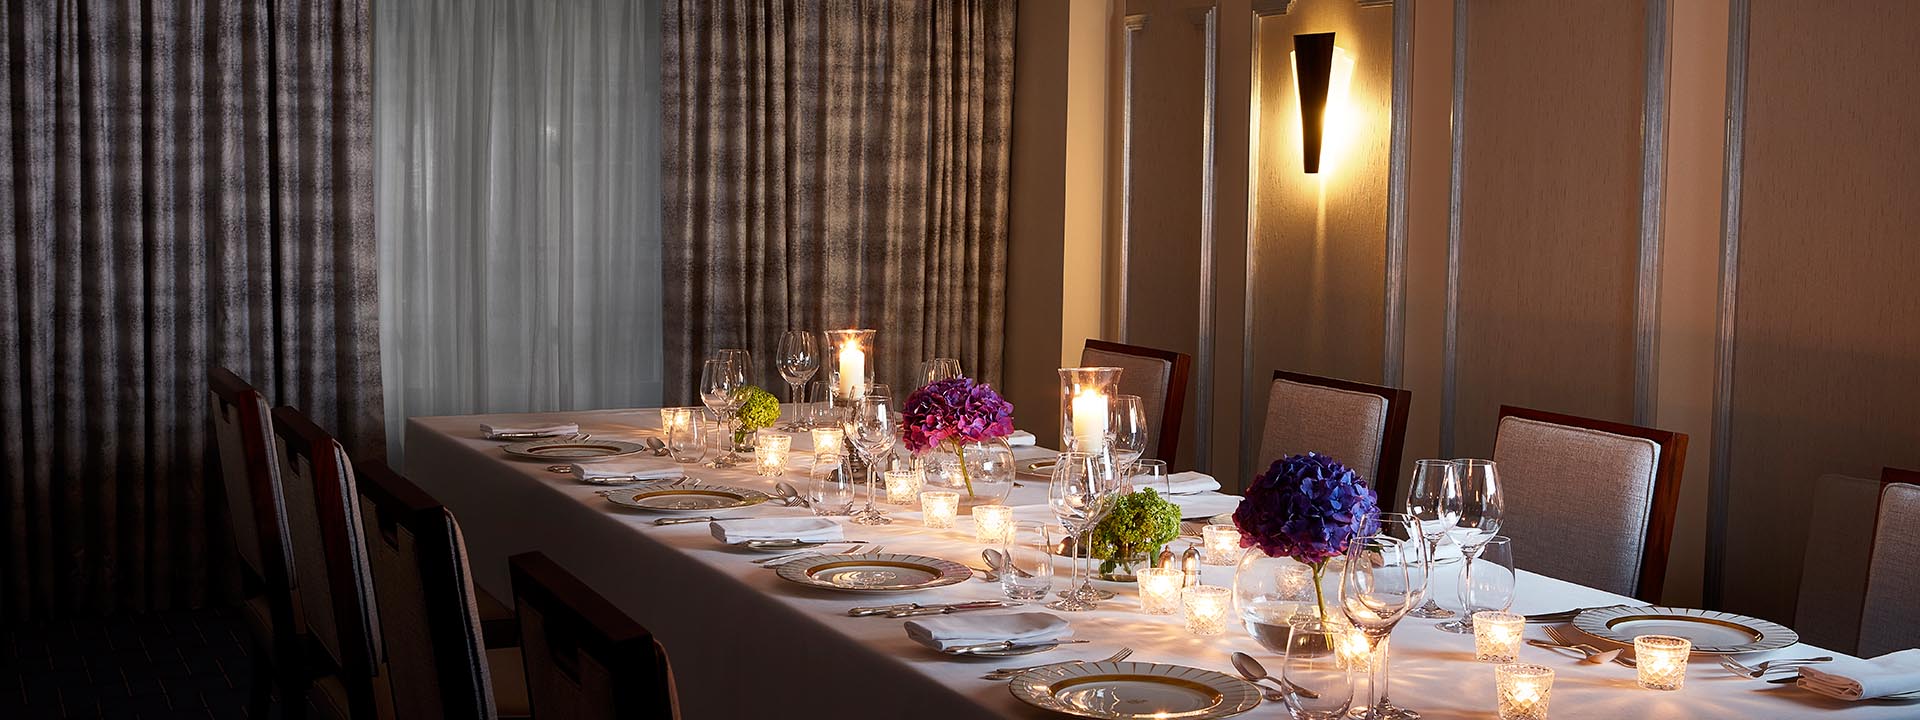 A view of the luxuriously set table with floral arrangements and lit candles in the St James Room.